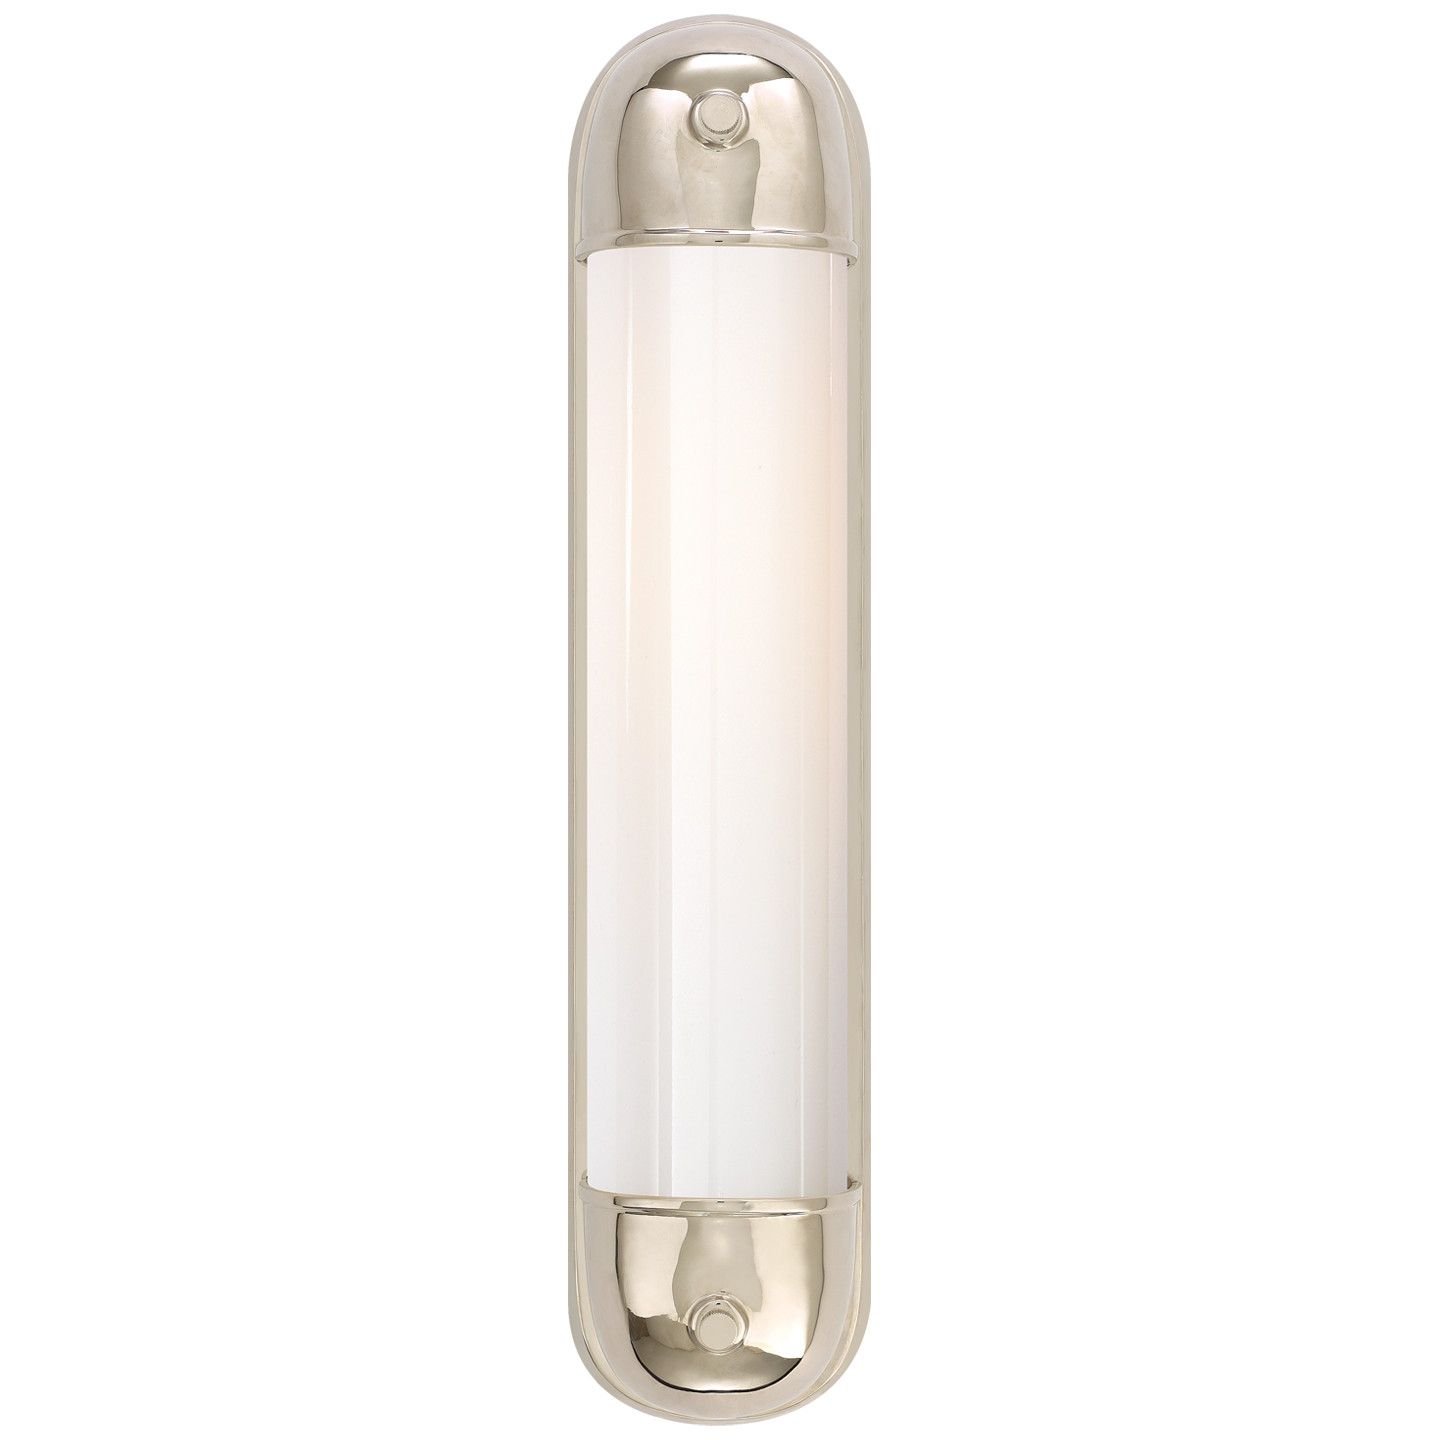 Selecta Long Glass Sconce Polished Nickel